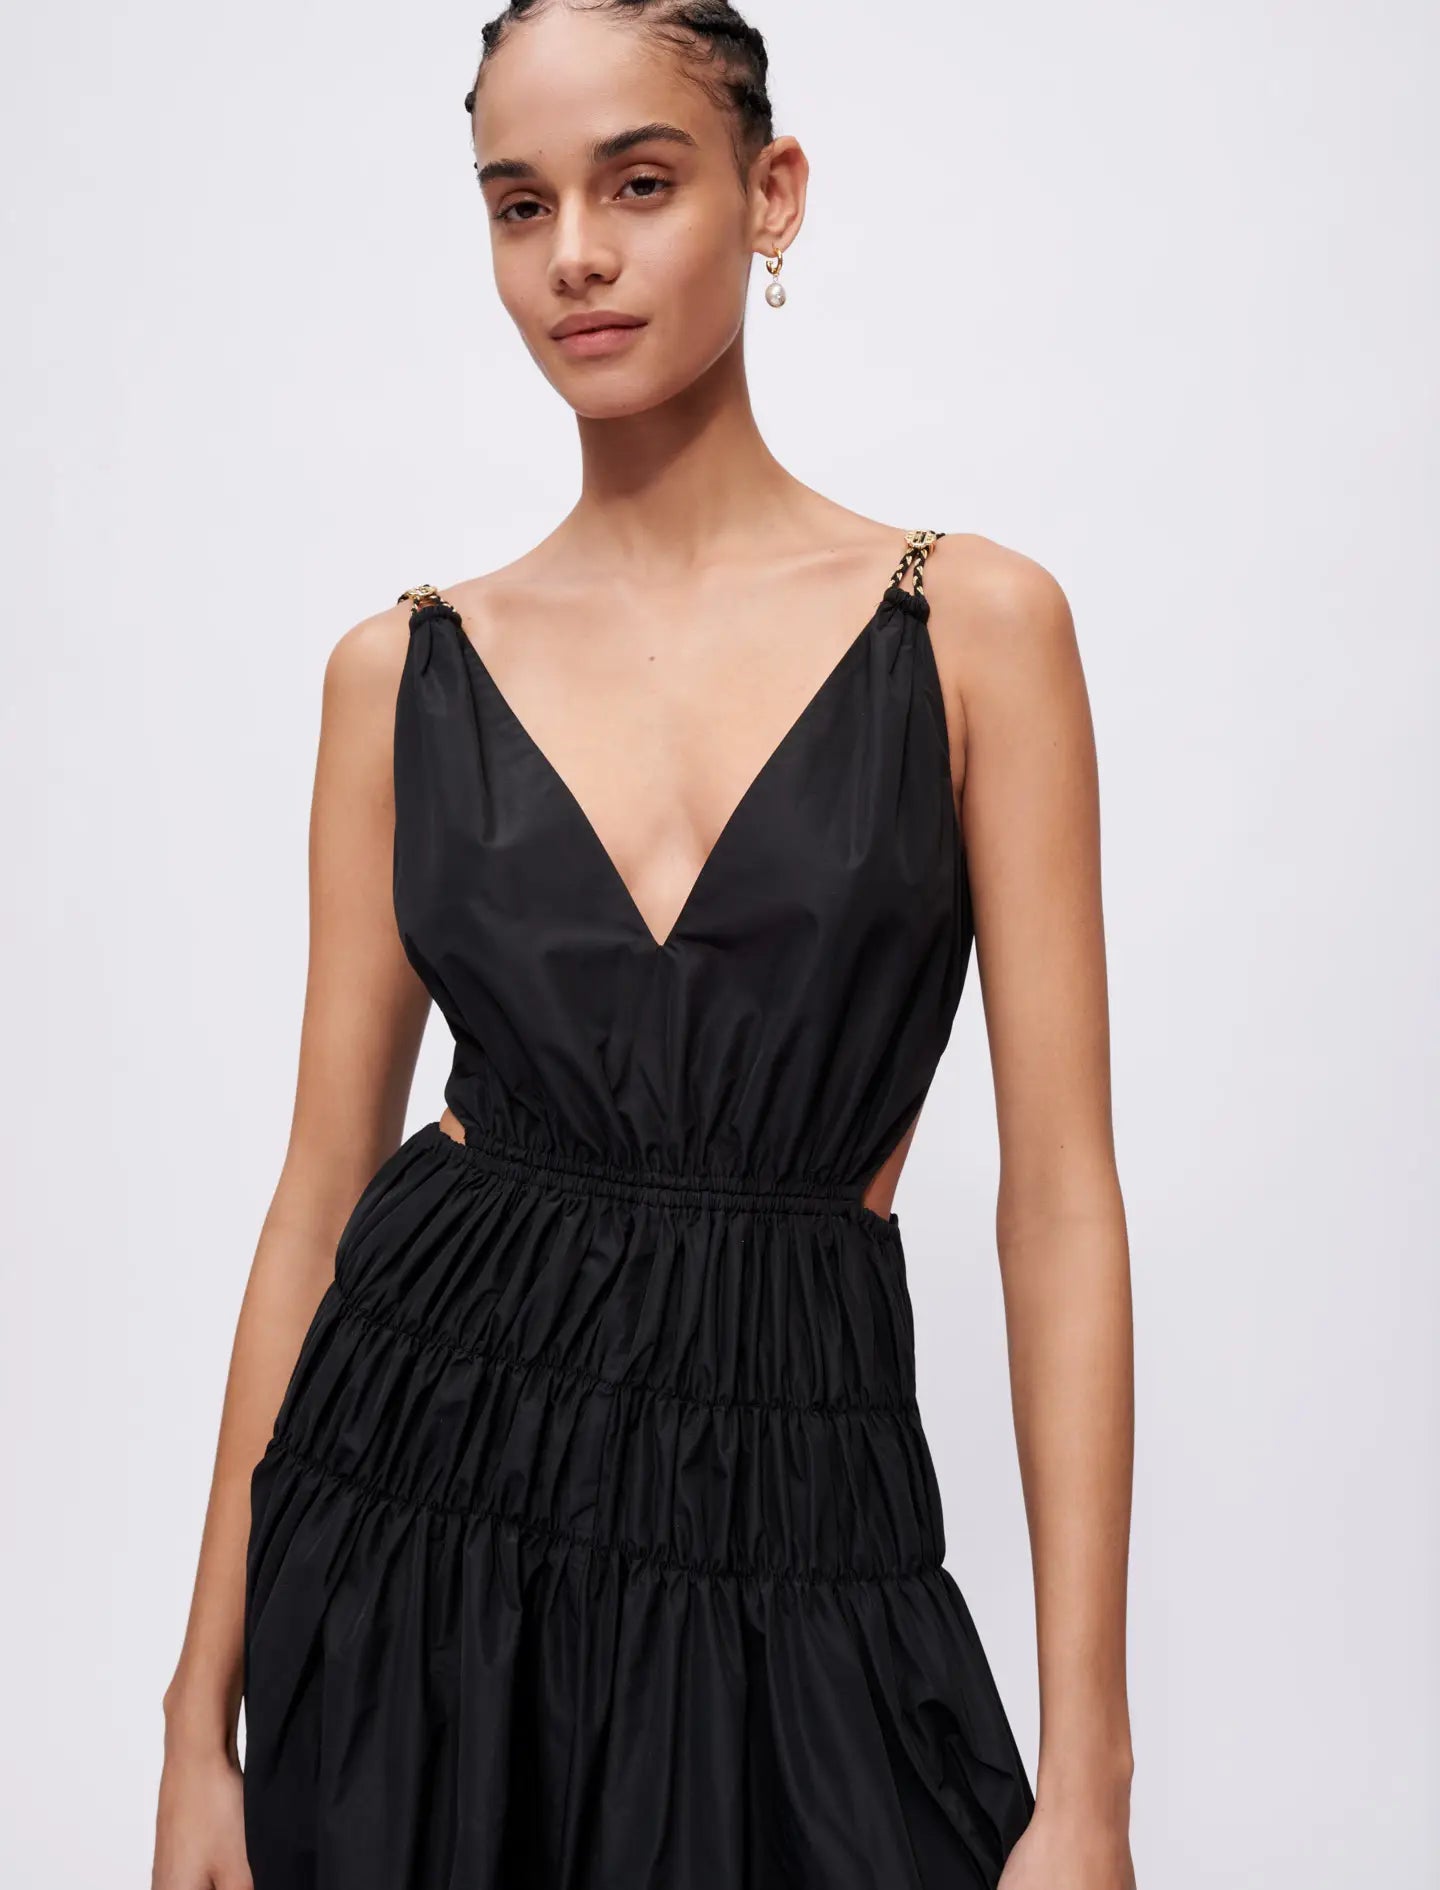 Black featured TAFFETA DRESS WITH CUT-OUT AT THE WAIST